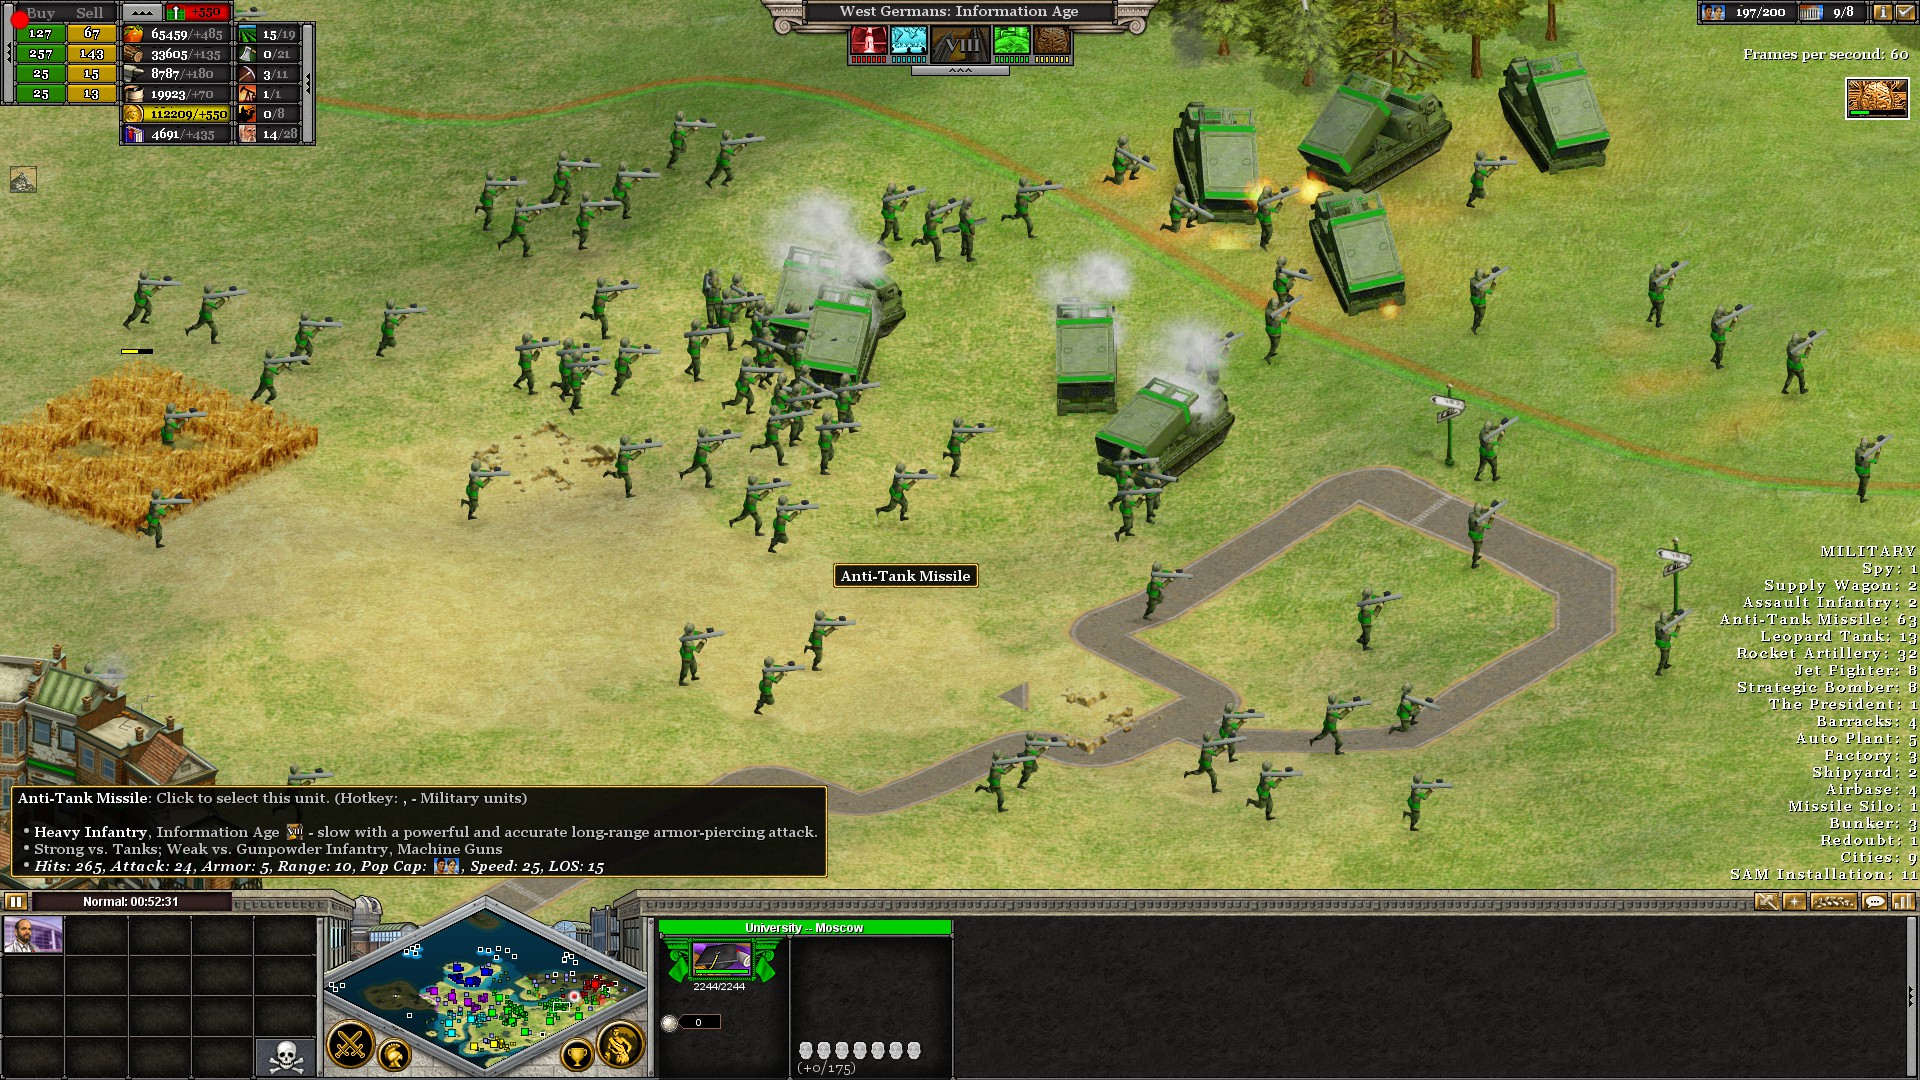 Rise of Nations: Extended Edition System Requirements - Can I Run It? -  PCGameBenchmark